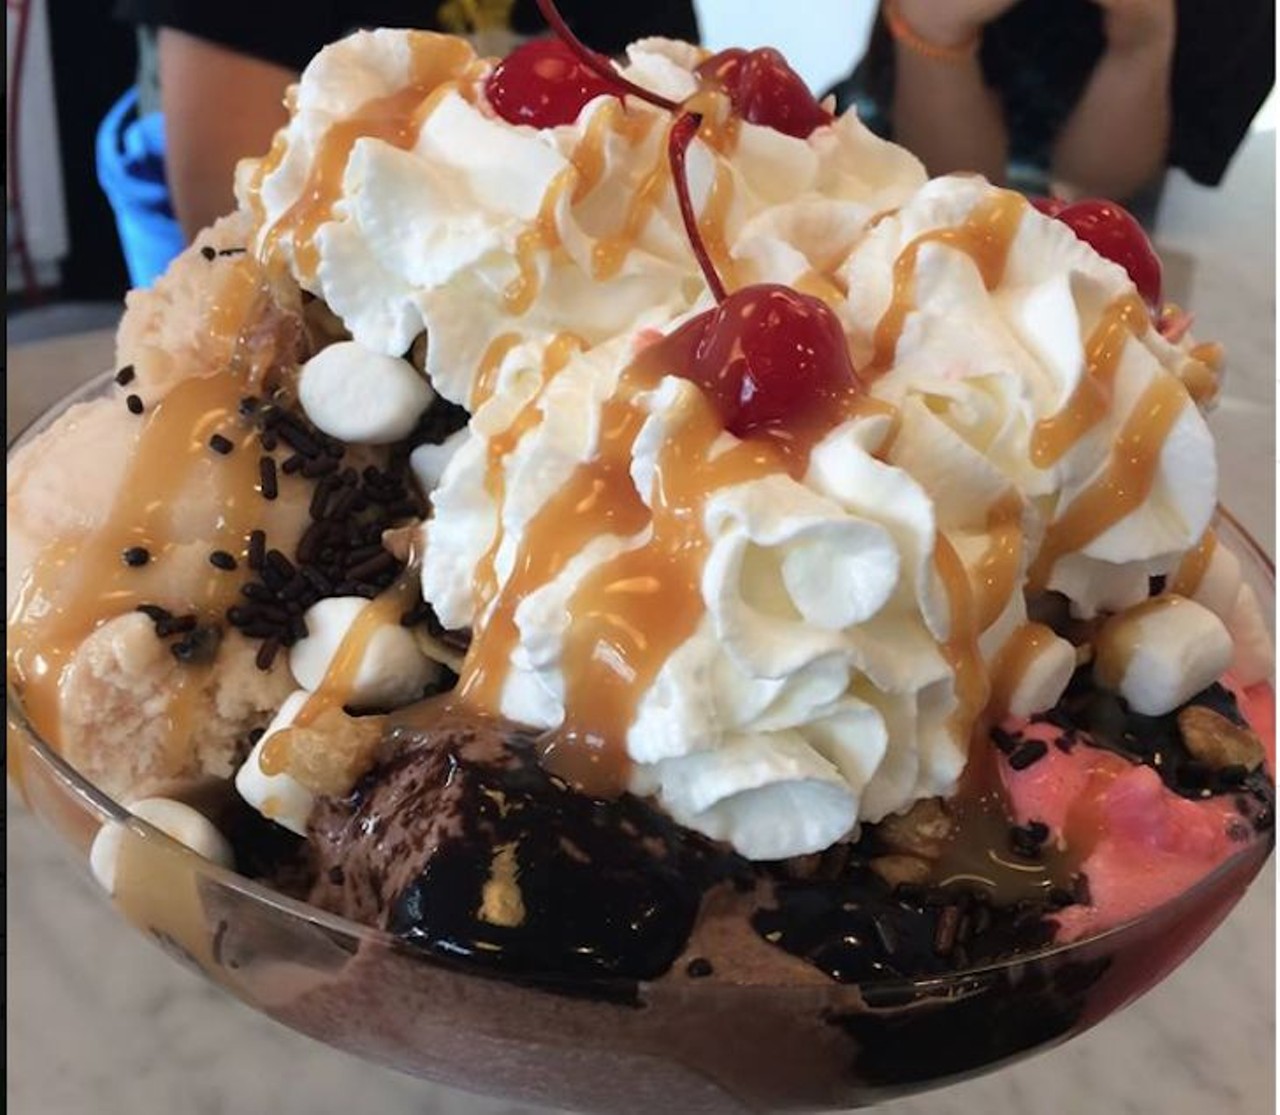 The Soda Fountain: The Zoo  
2525 Edgewater Drive, 407-540-1006
Gather all your friends to share this wild sundae. The Soda Fountain in College Park offers a five-scoop sundae topped with caramel, hot fudge, whipped cream and a bunch of cherries. 
Photo via Facebook/The Soda Fountain